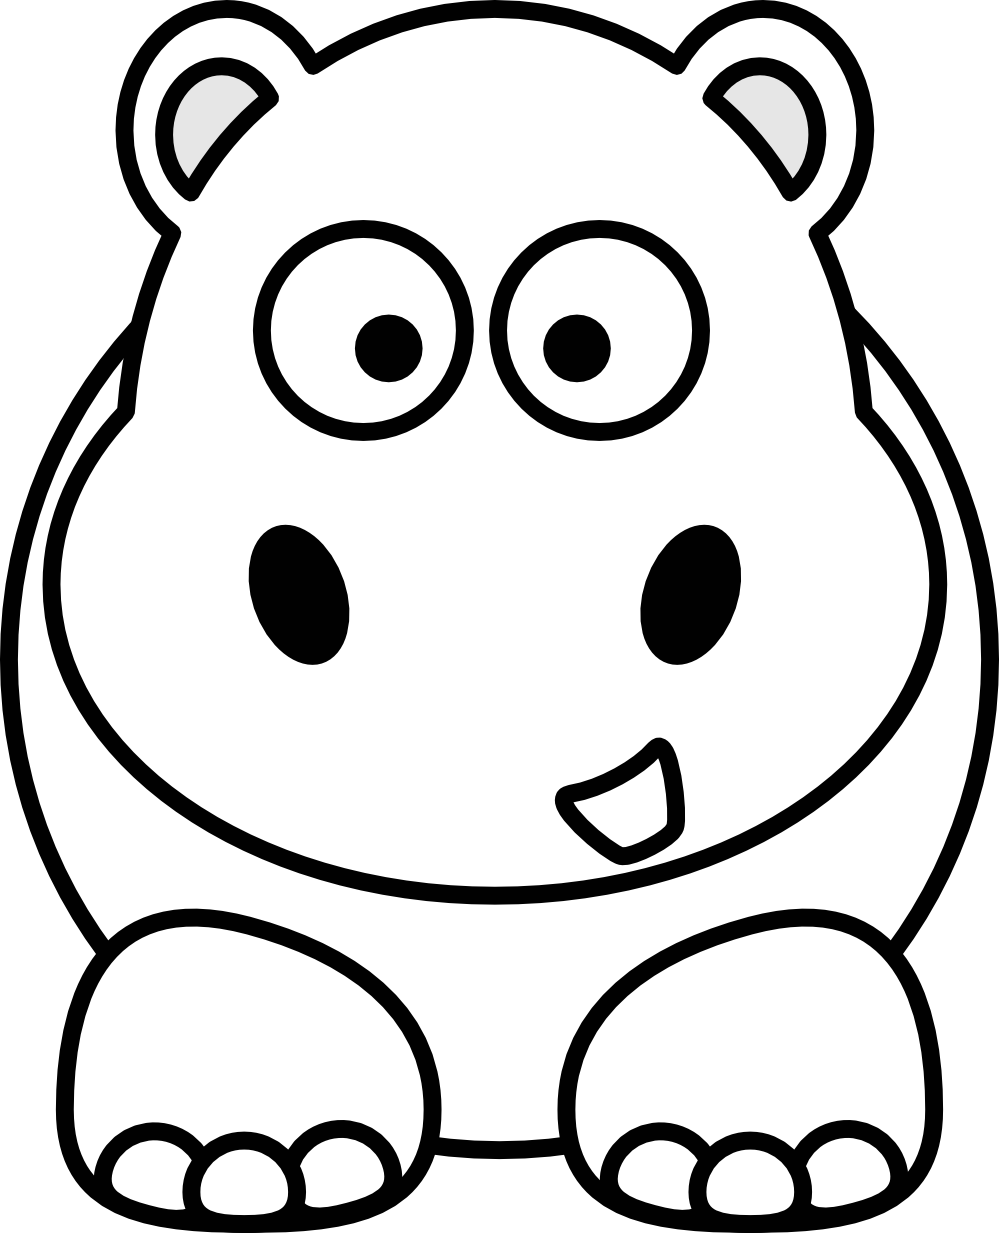 Free Black And White Cartoon Animals, Download Free Clip Art